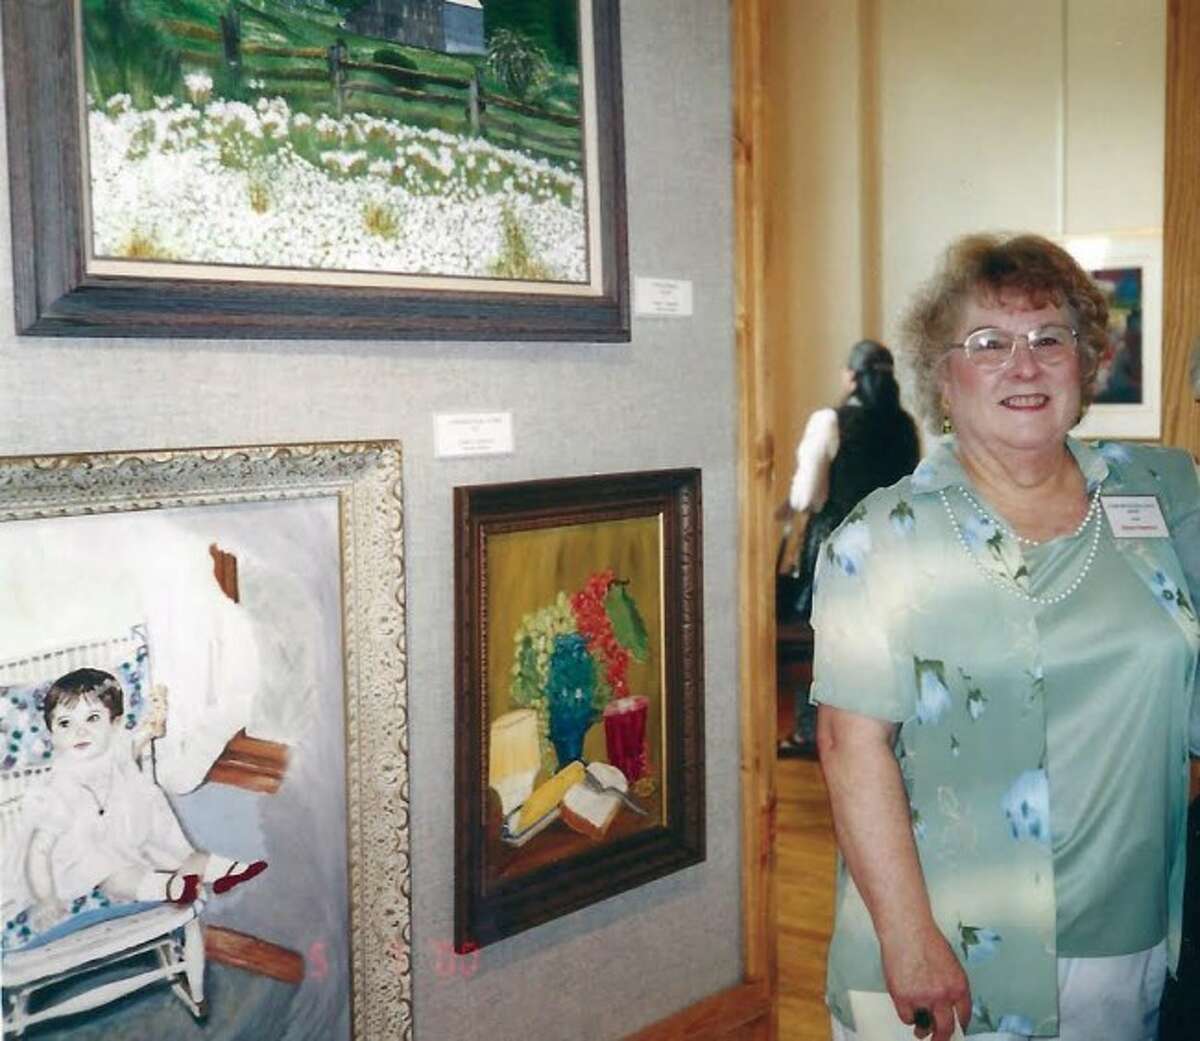 West Shore Medical Center is pleased to host an eclectic exhibit of art by Manistee native Eileen Hawkins, now through May. Pictured are Eileen Hawkins at a recent art exhibit.